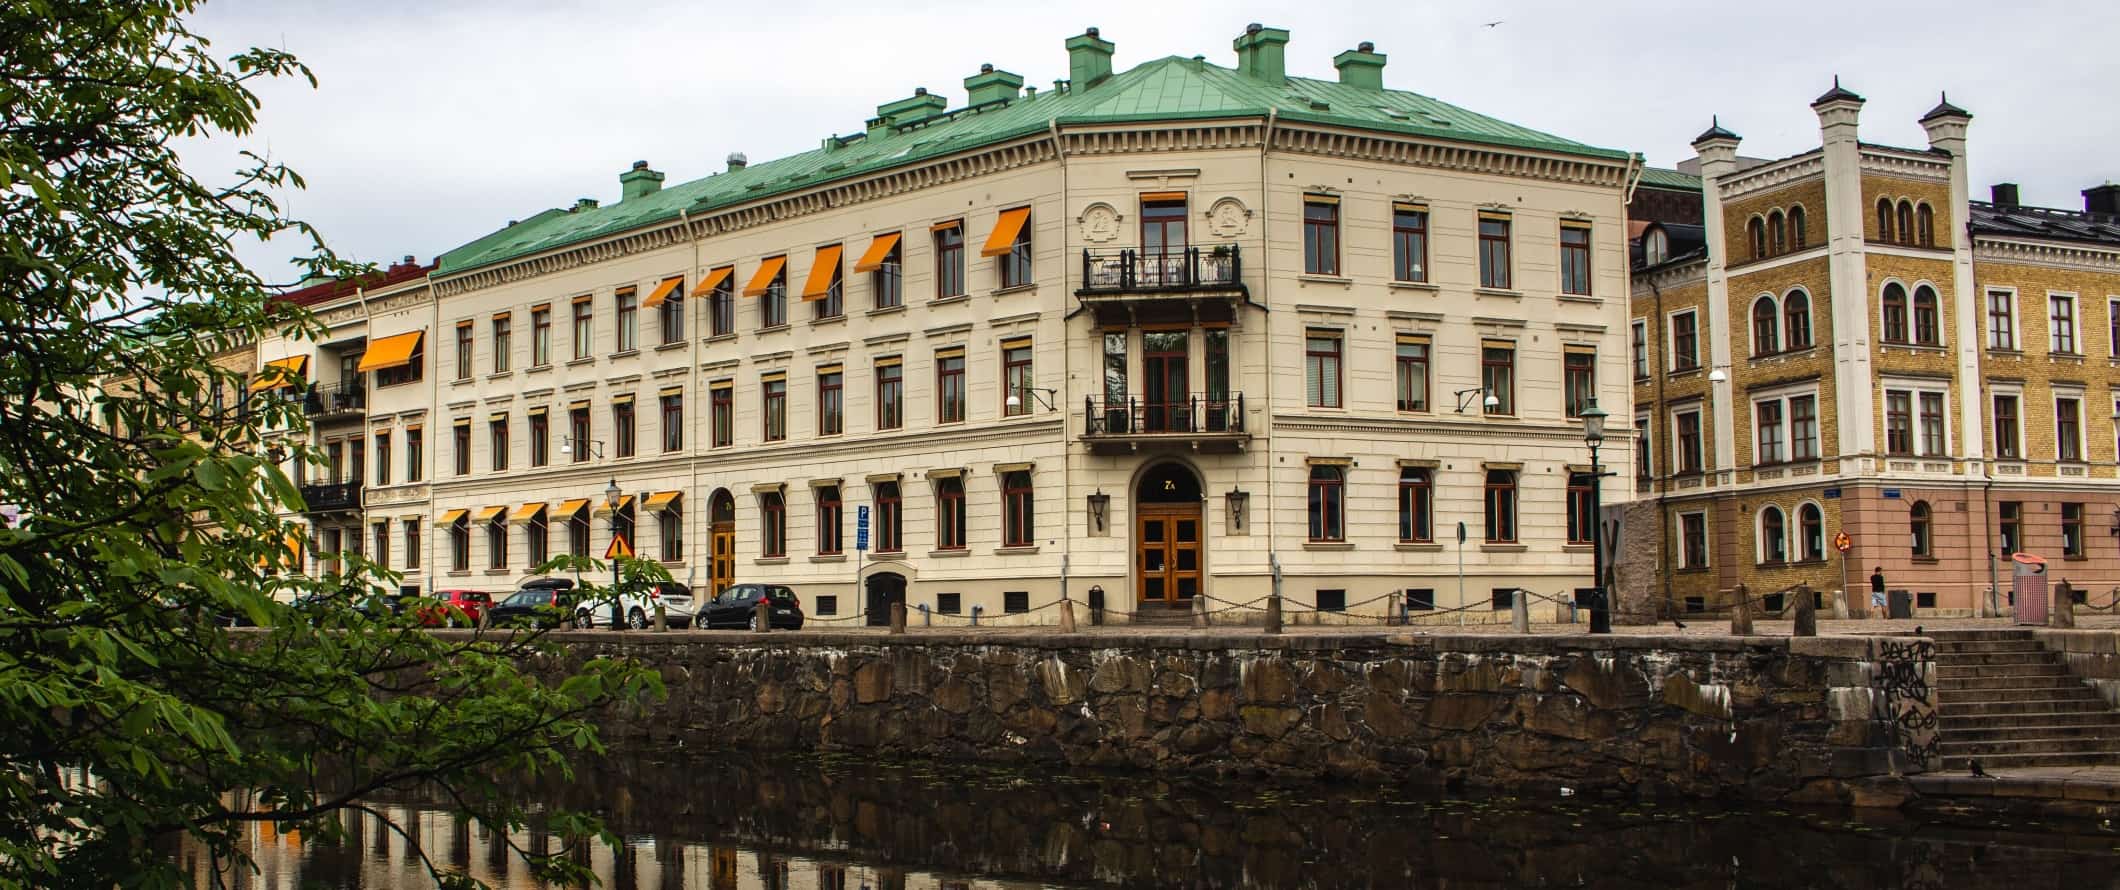 Historic buildings along the waterfront in Gothenburg, Sweden